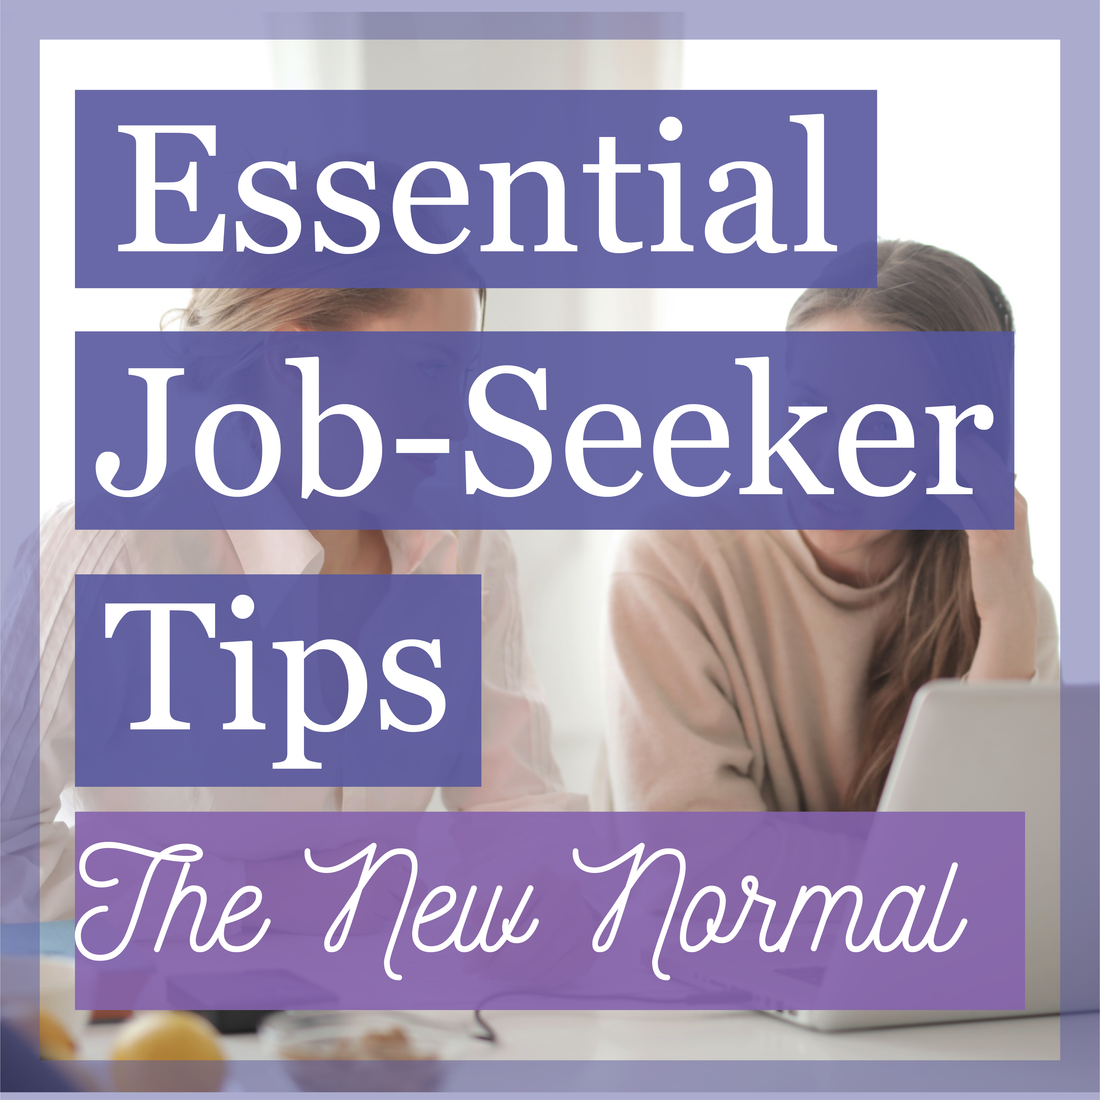 Looking for work during times of uncertainty needs a new set of strategies. Check out our 7 easy tips for employment seekers during and after Covid-19